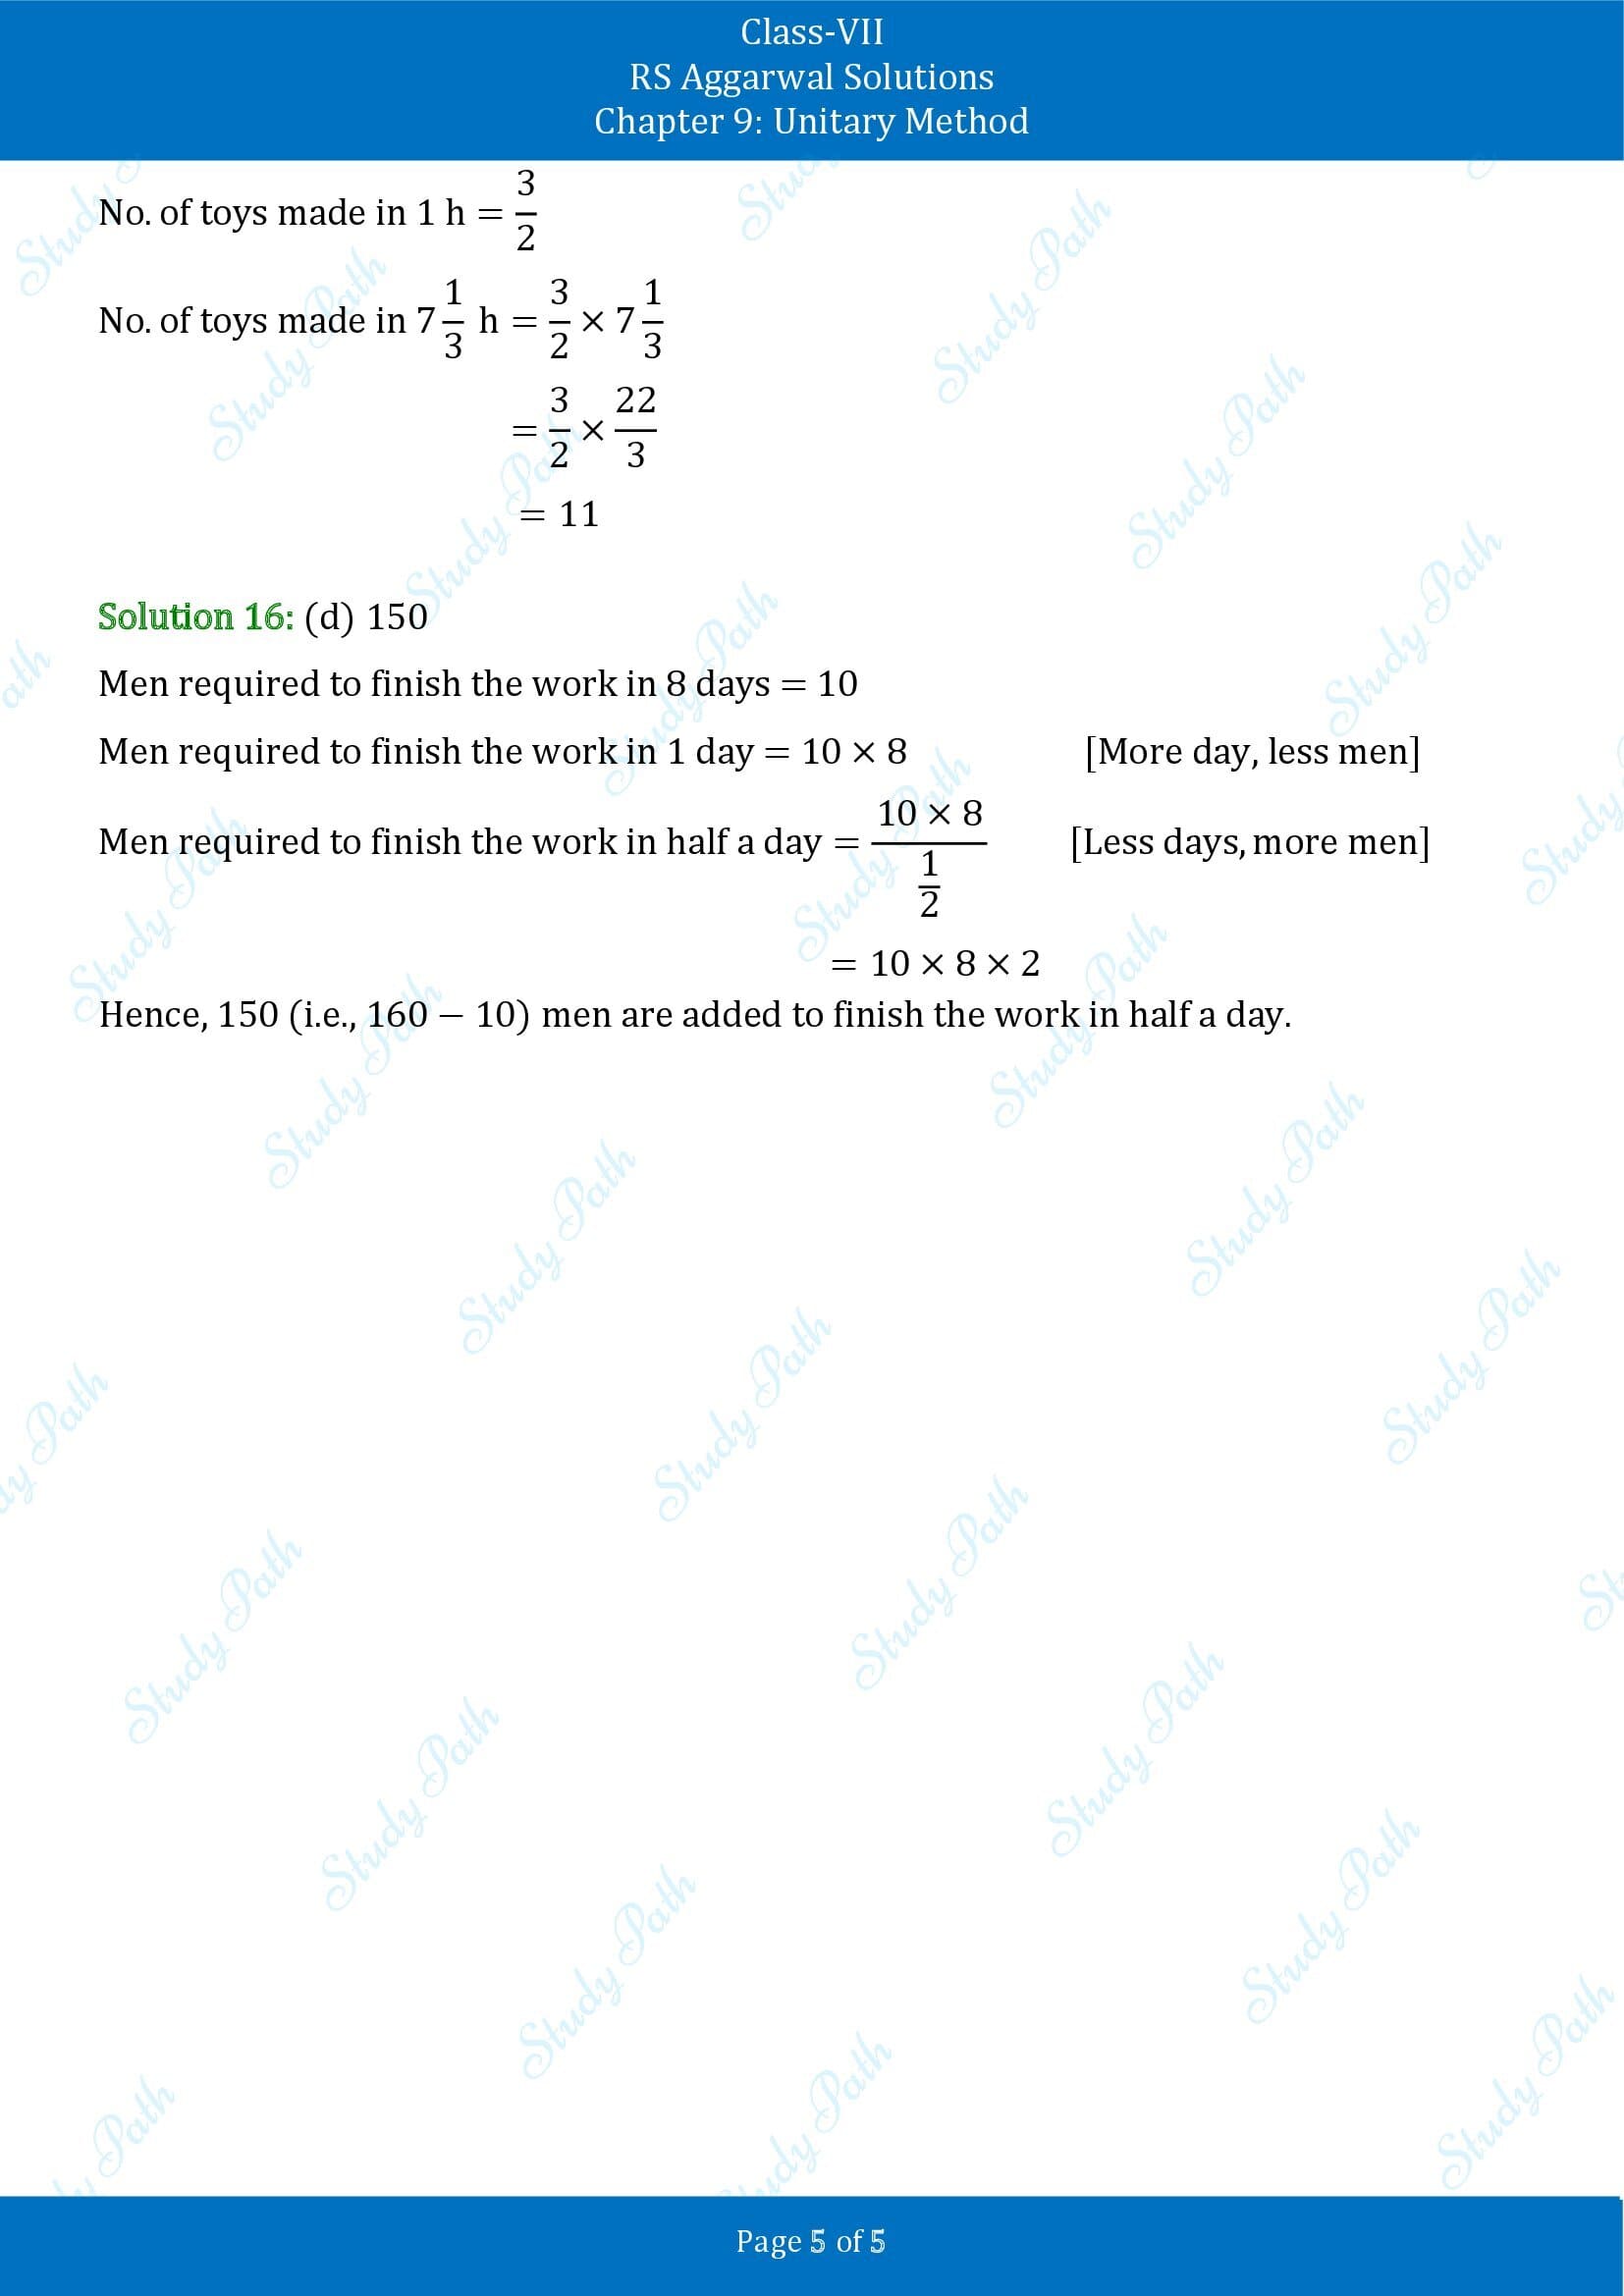 RS Aggarwal Solutions Class 7 Chapter 9 Unitary Method Exercise 9C MCQs 00005